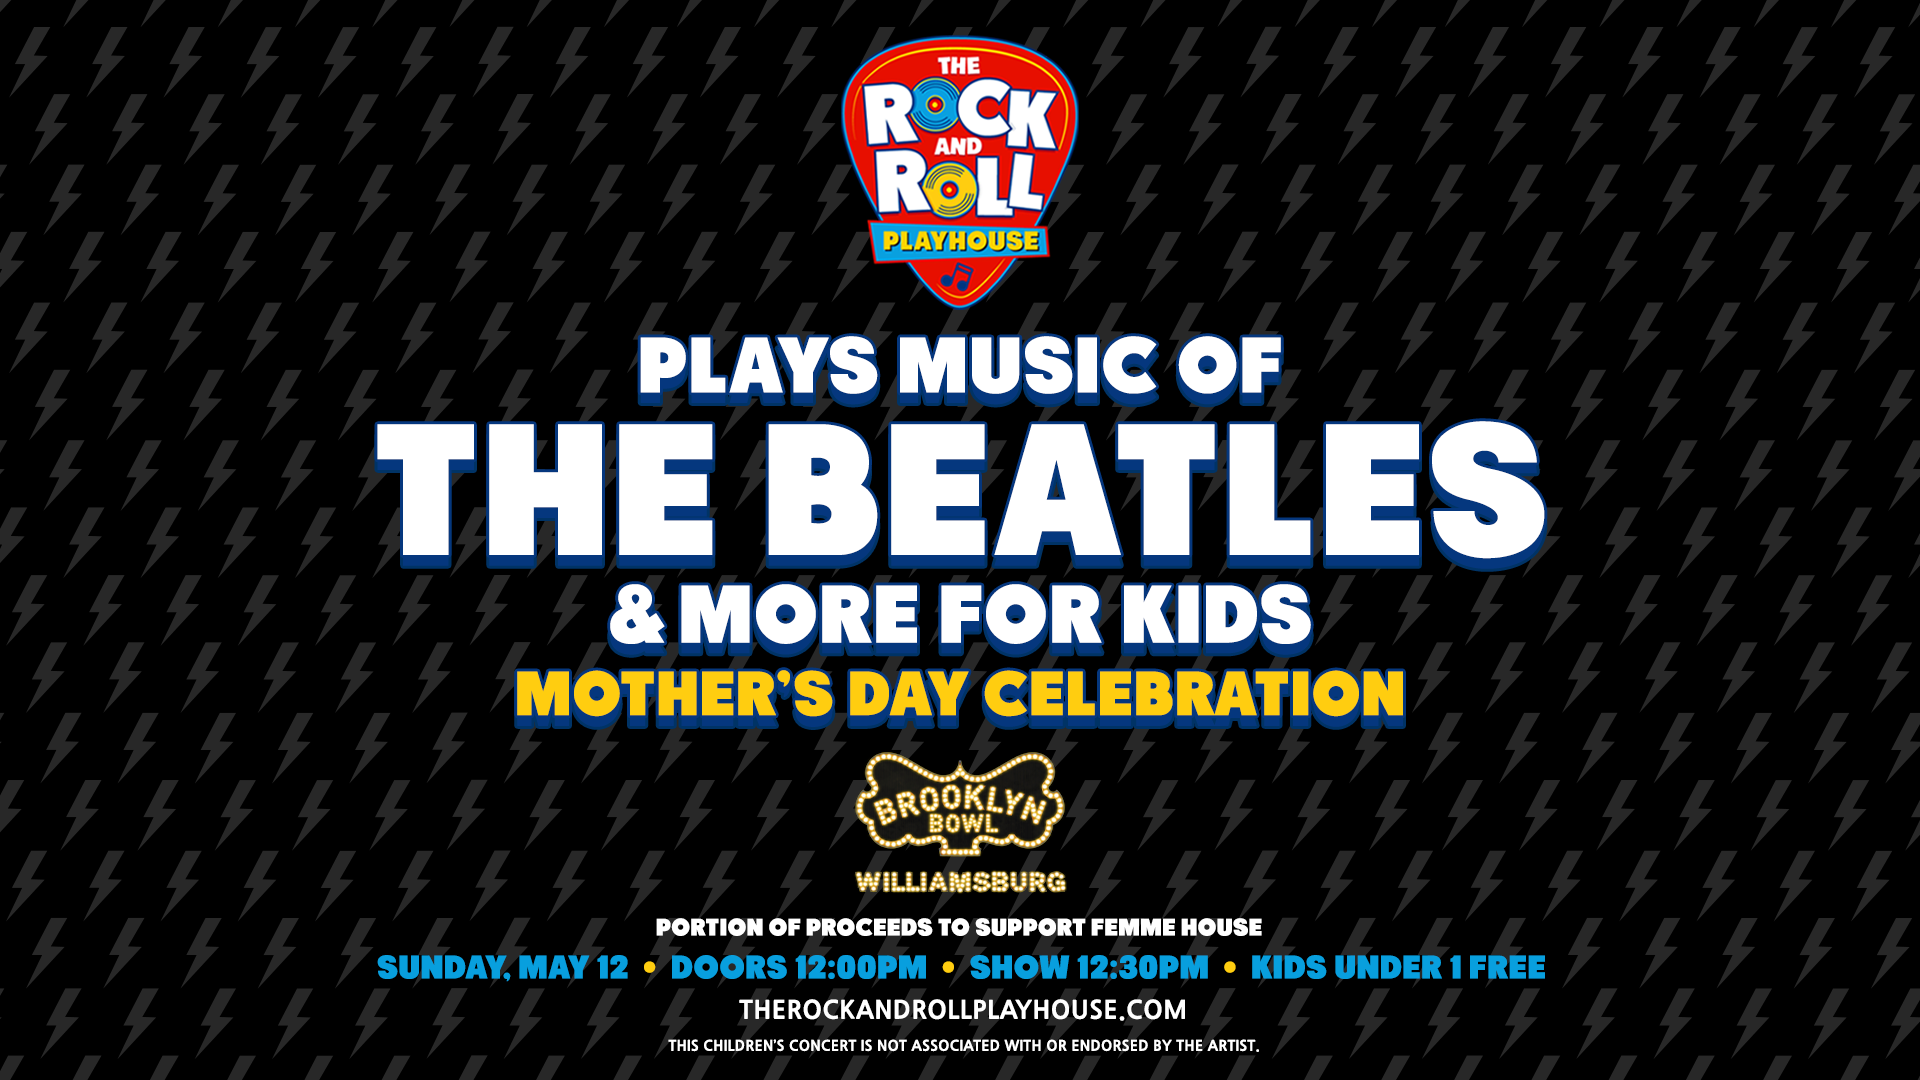 The Rock and Roll Playhouse plays the Music of The Beatles + More for Kids